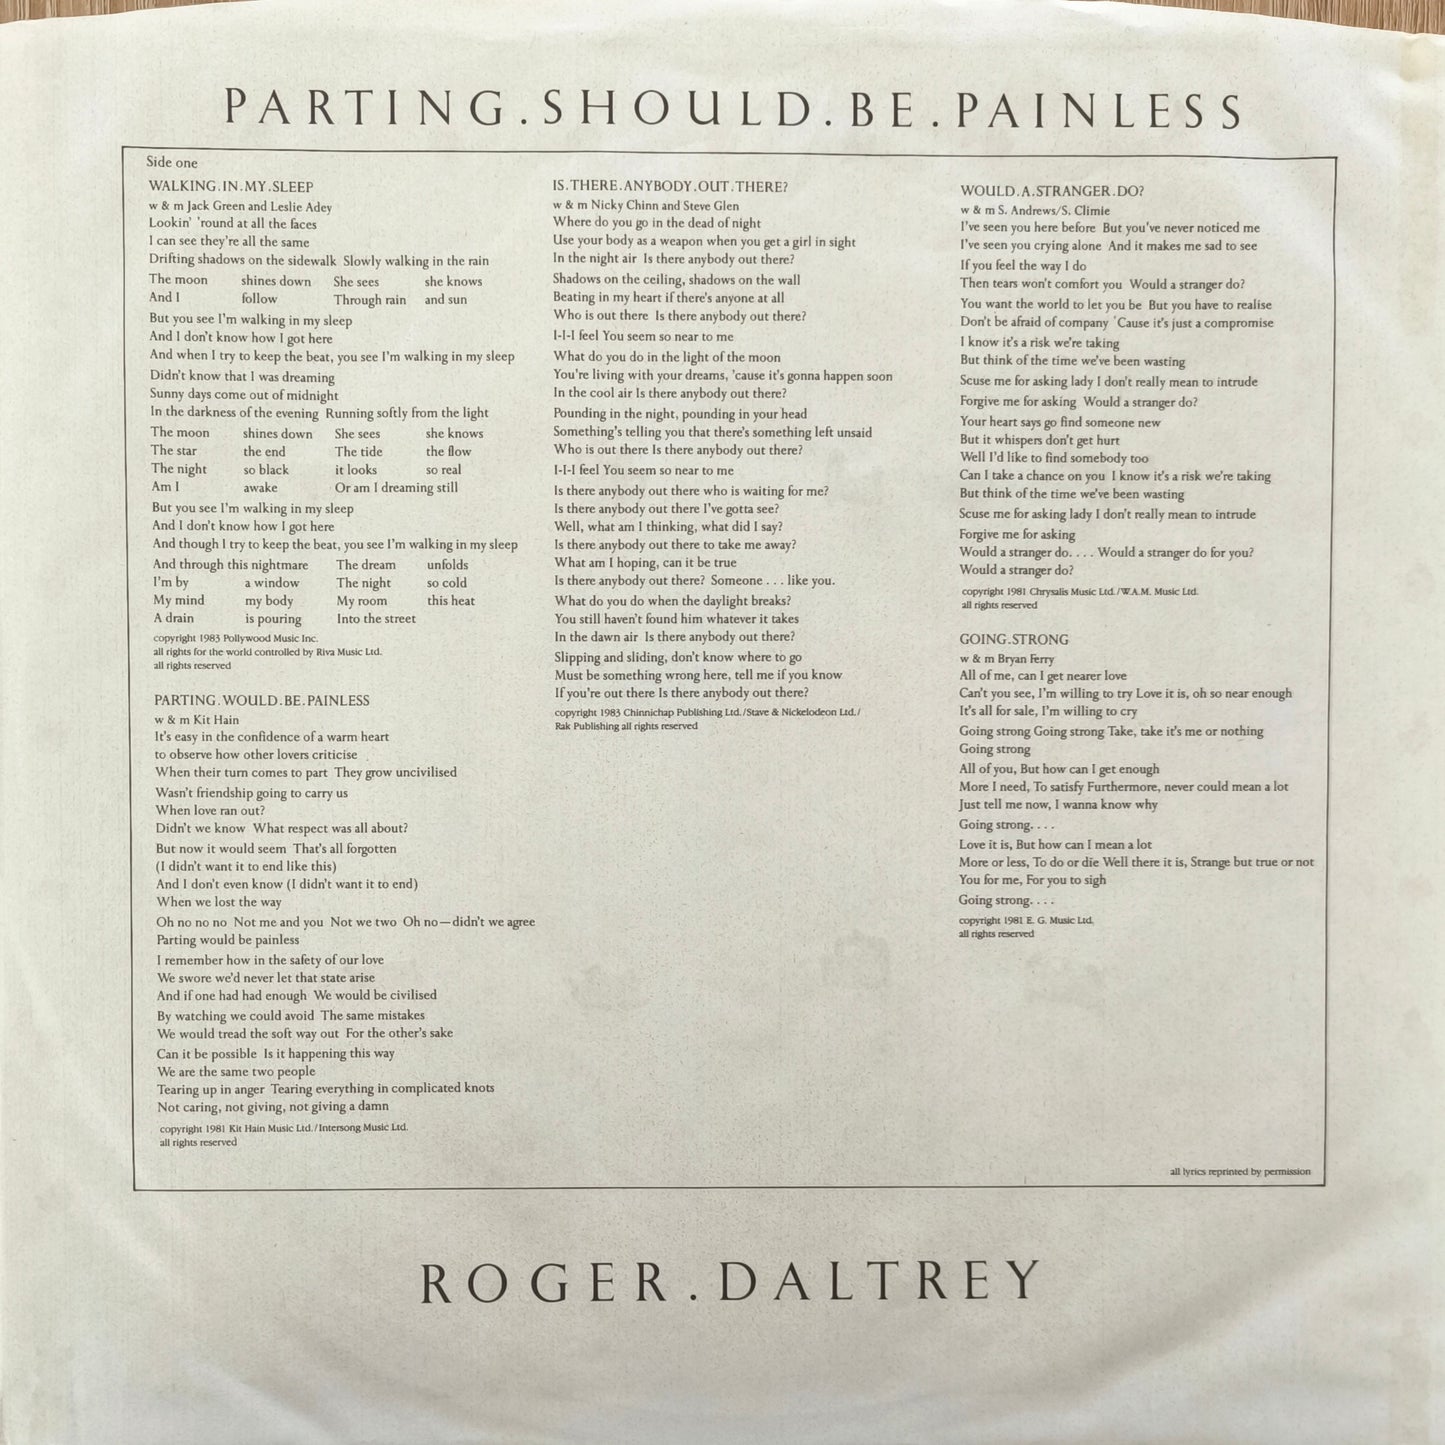 ROGER DALTREY - Parting Should Be Painless